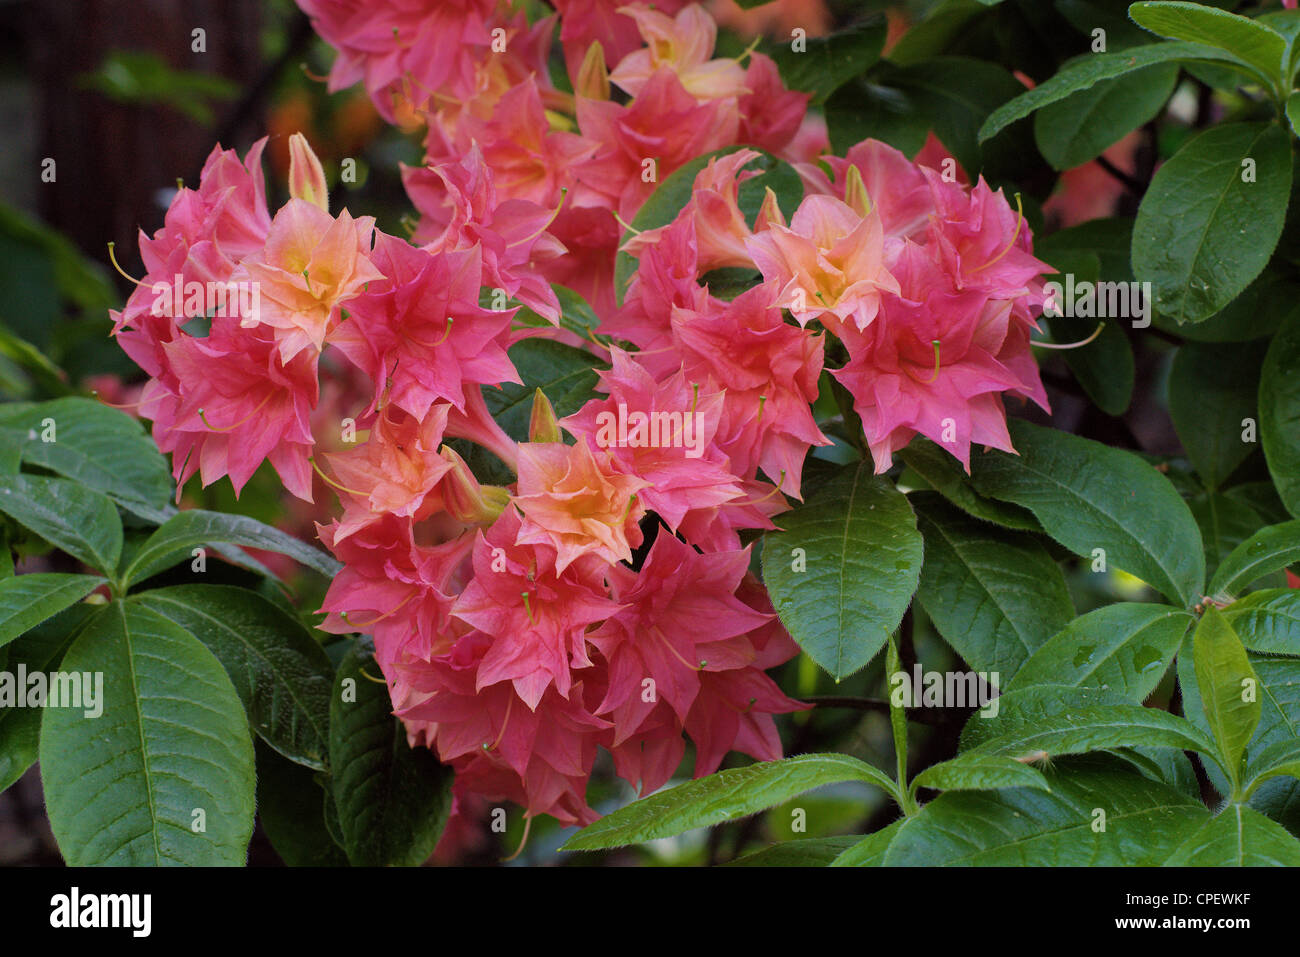 Red orange Rhododendron 'Norma' blooming Stock Photo